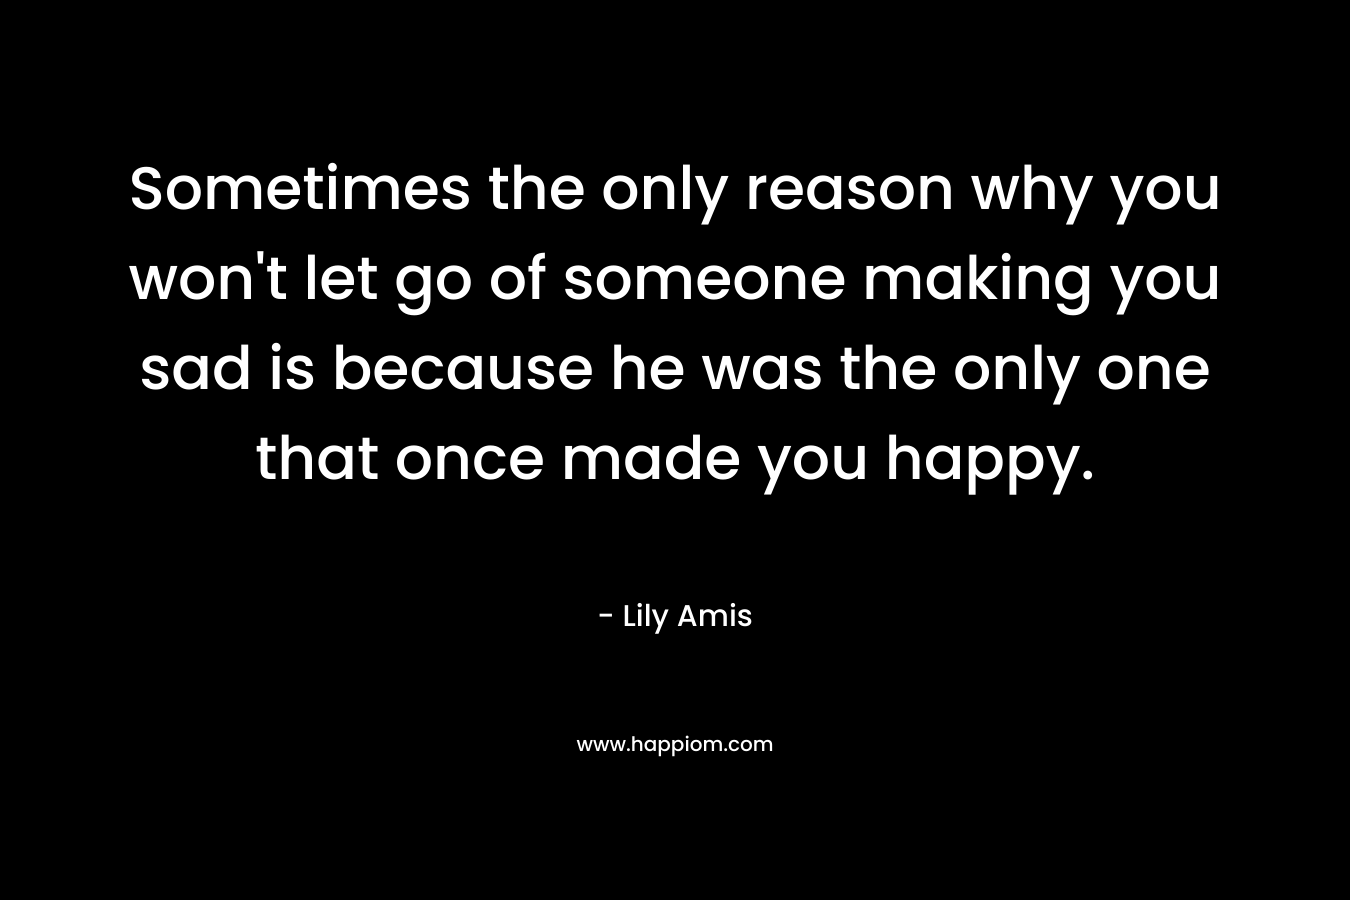 Sometimes the only reason why you won’t let go of someone making you sad is because he was the only one that once made you happy. – Lily Amis